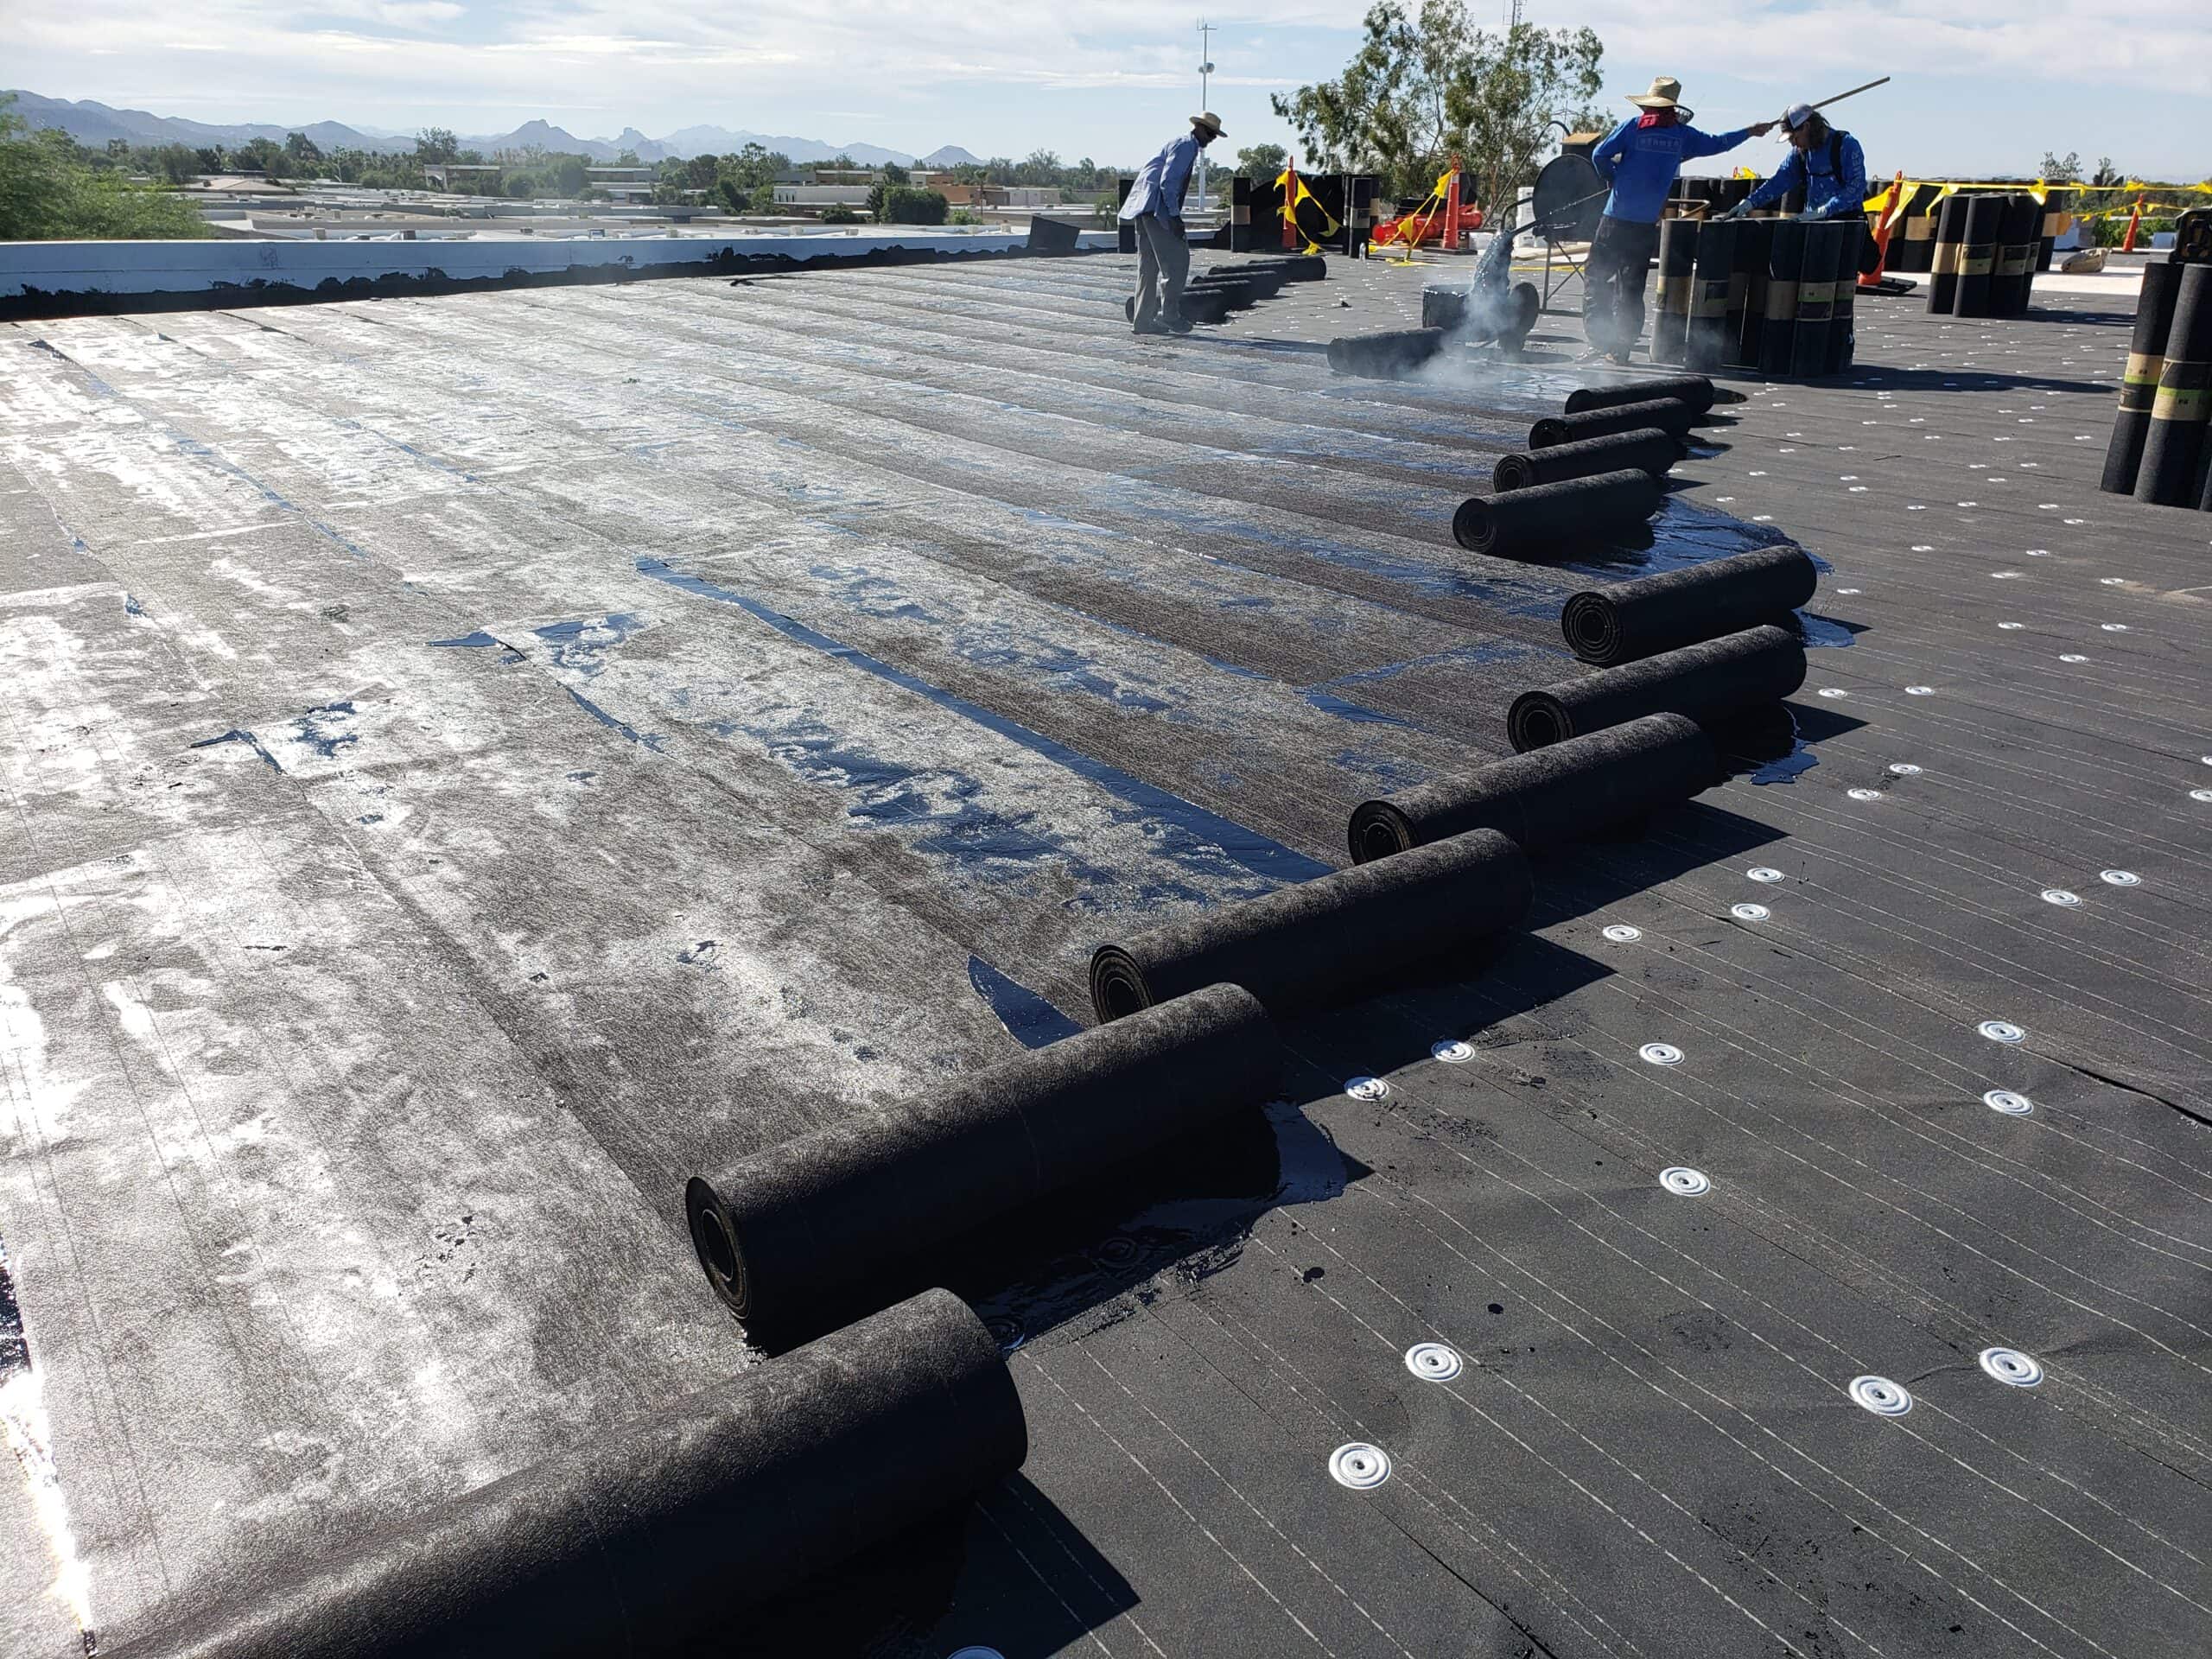 commercial roof coating phoenix quality work